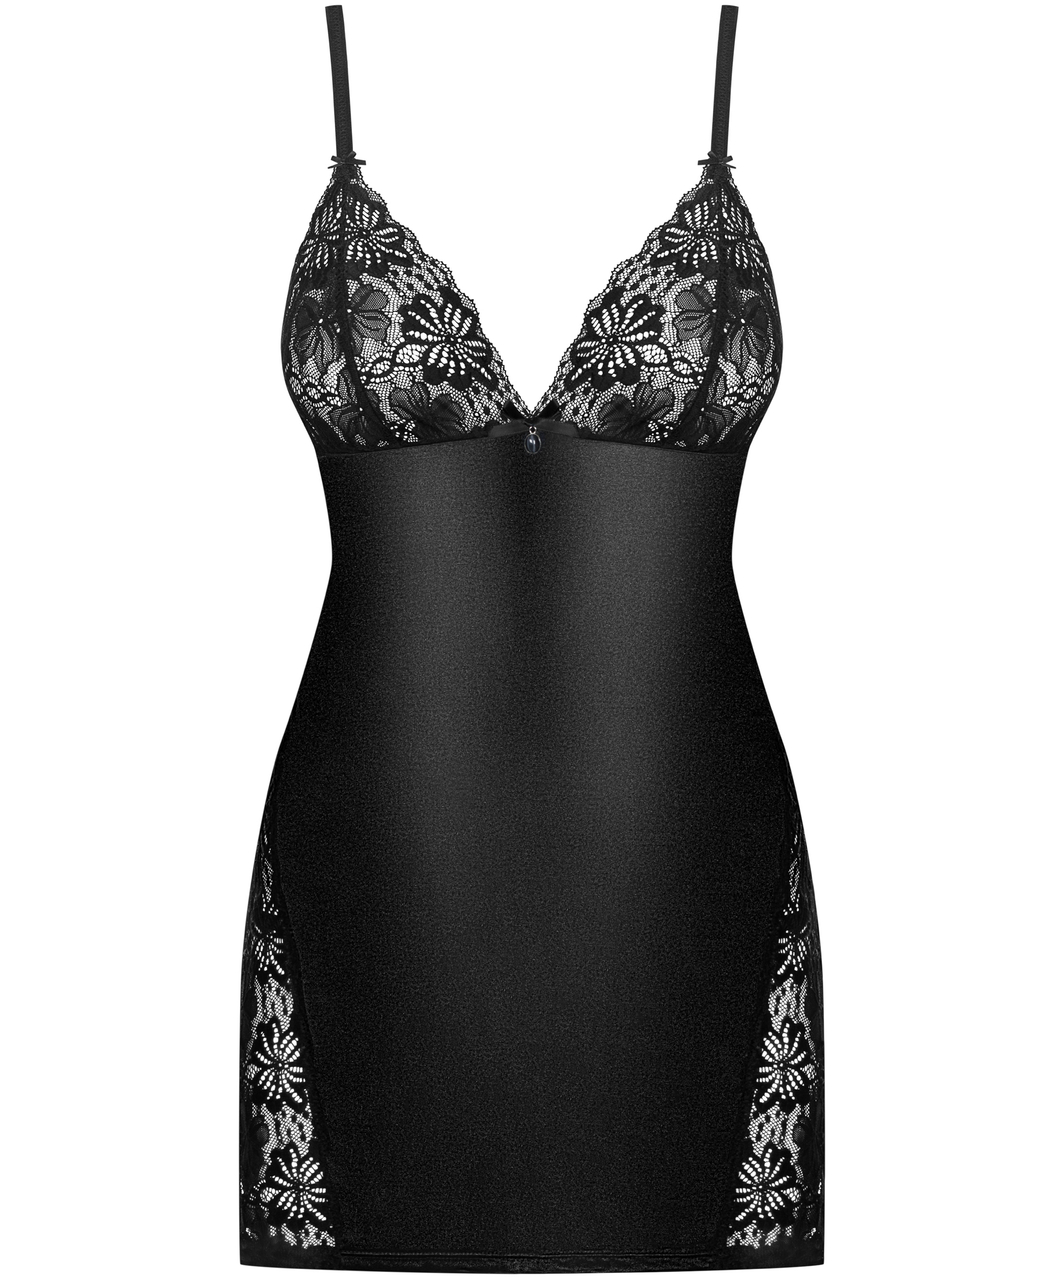 Obsessive black open back chemise with lace inserts